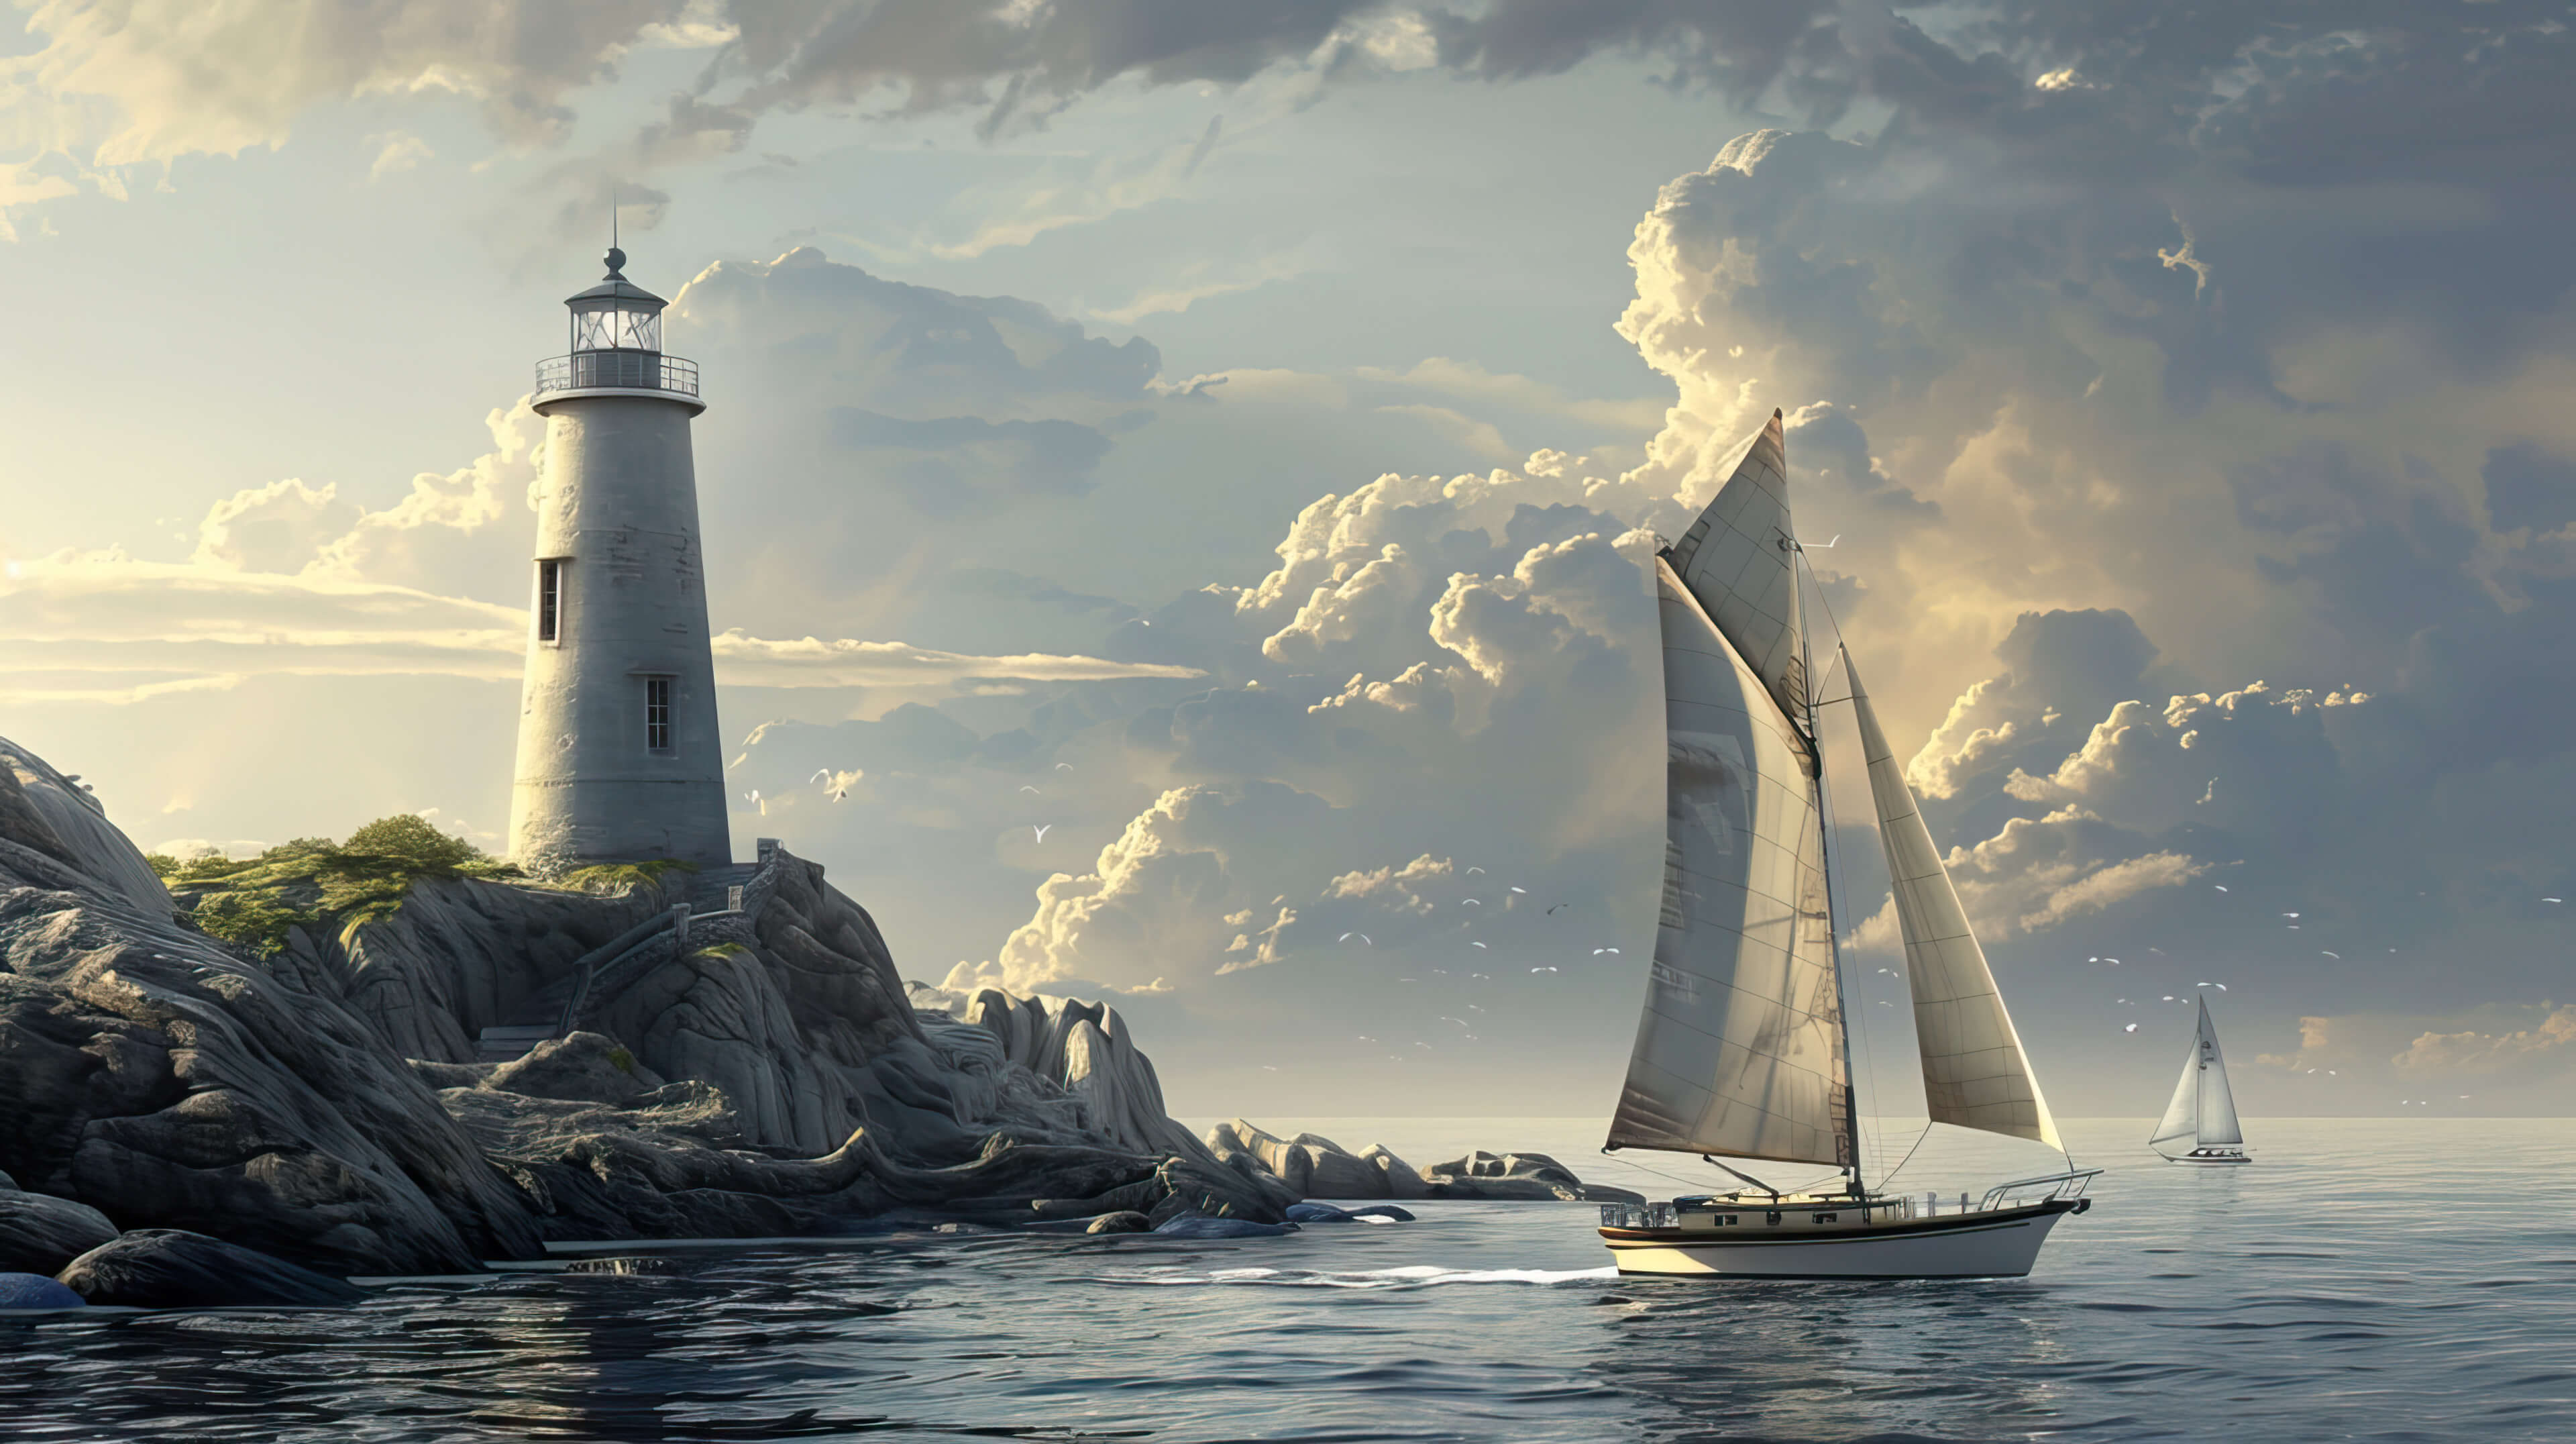 A vintage sailboat gracefully passes by a lighthouse on a rugged coastline evoking feelings of maritime history and romance in Nautical Memories